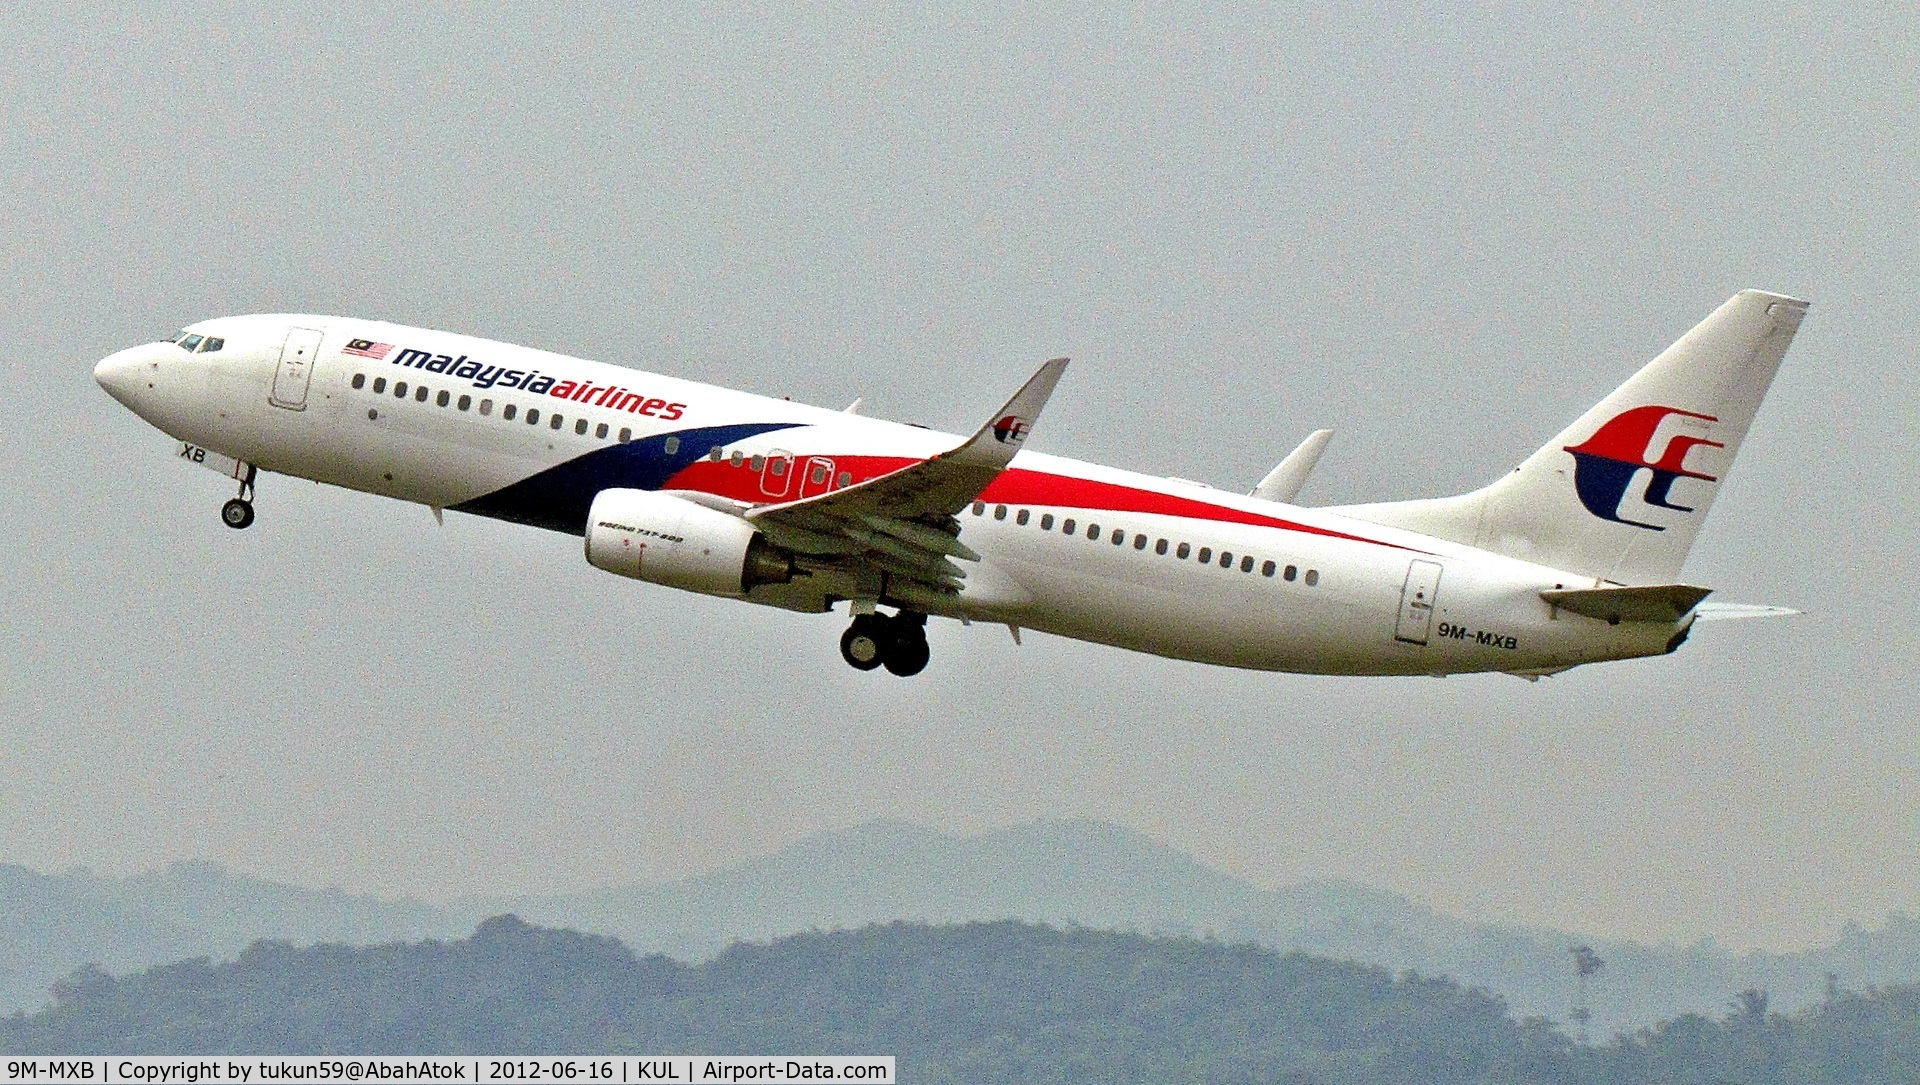 9M-MXB, 2010 Boeing 737-8H6 C/N 40129, Malaysia Airlines